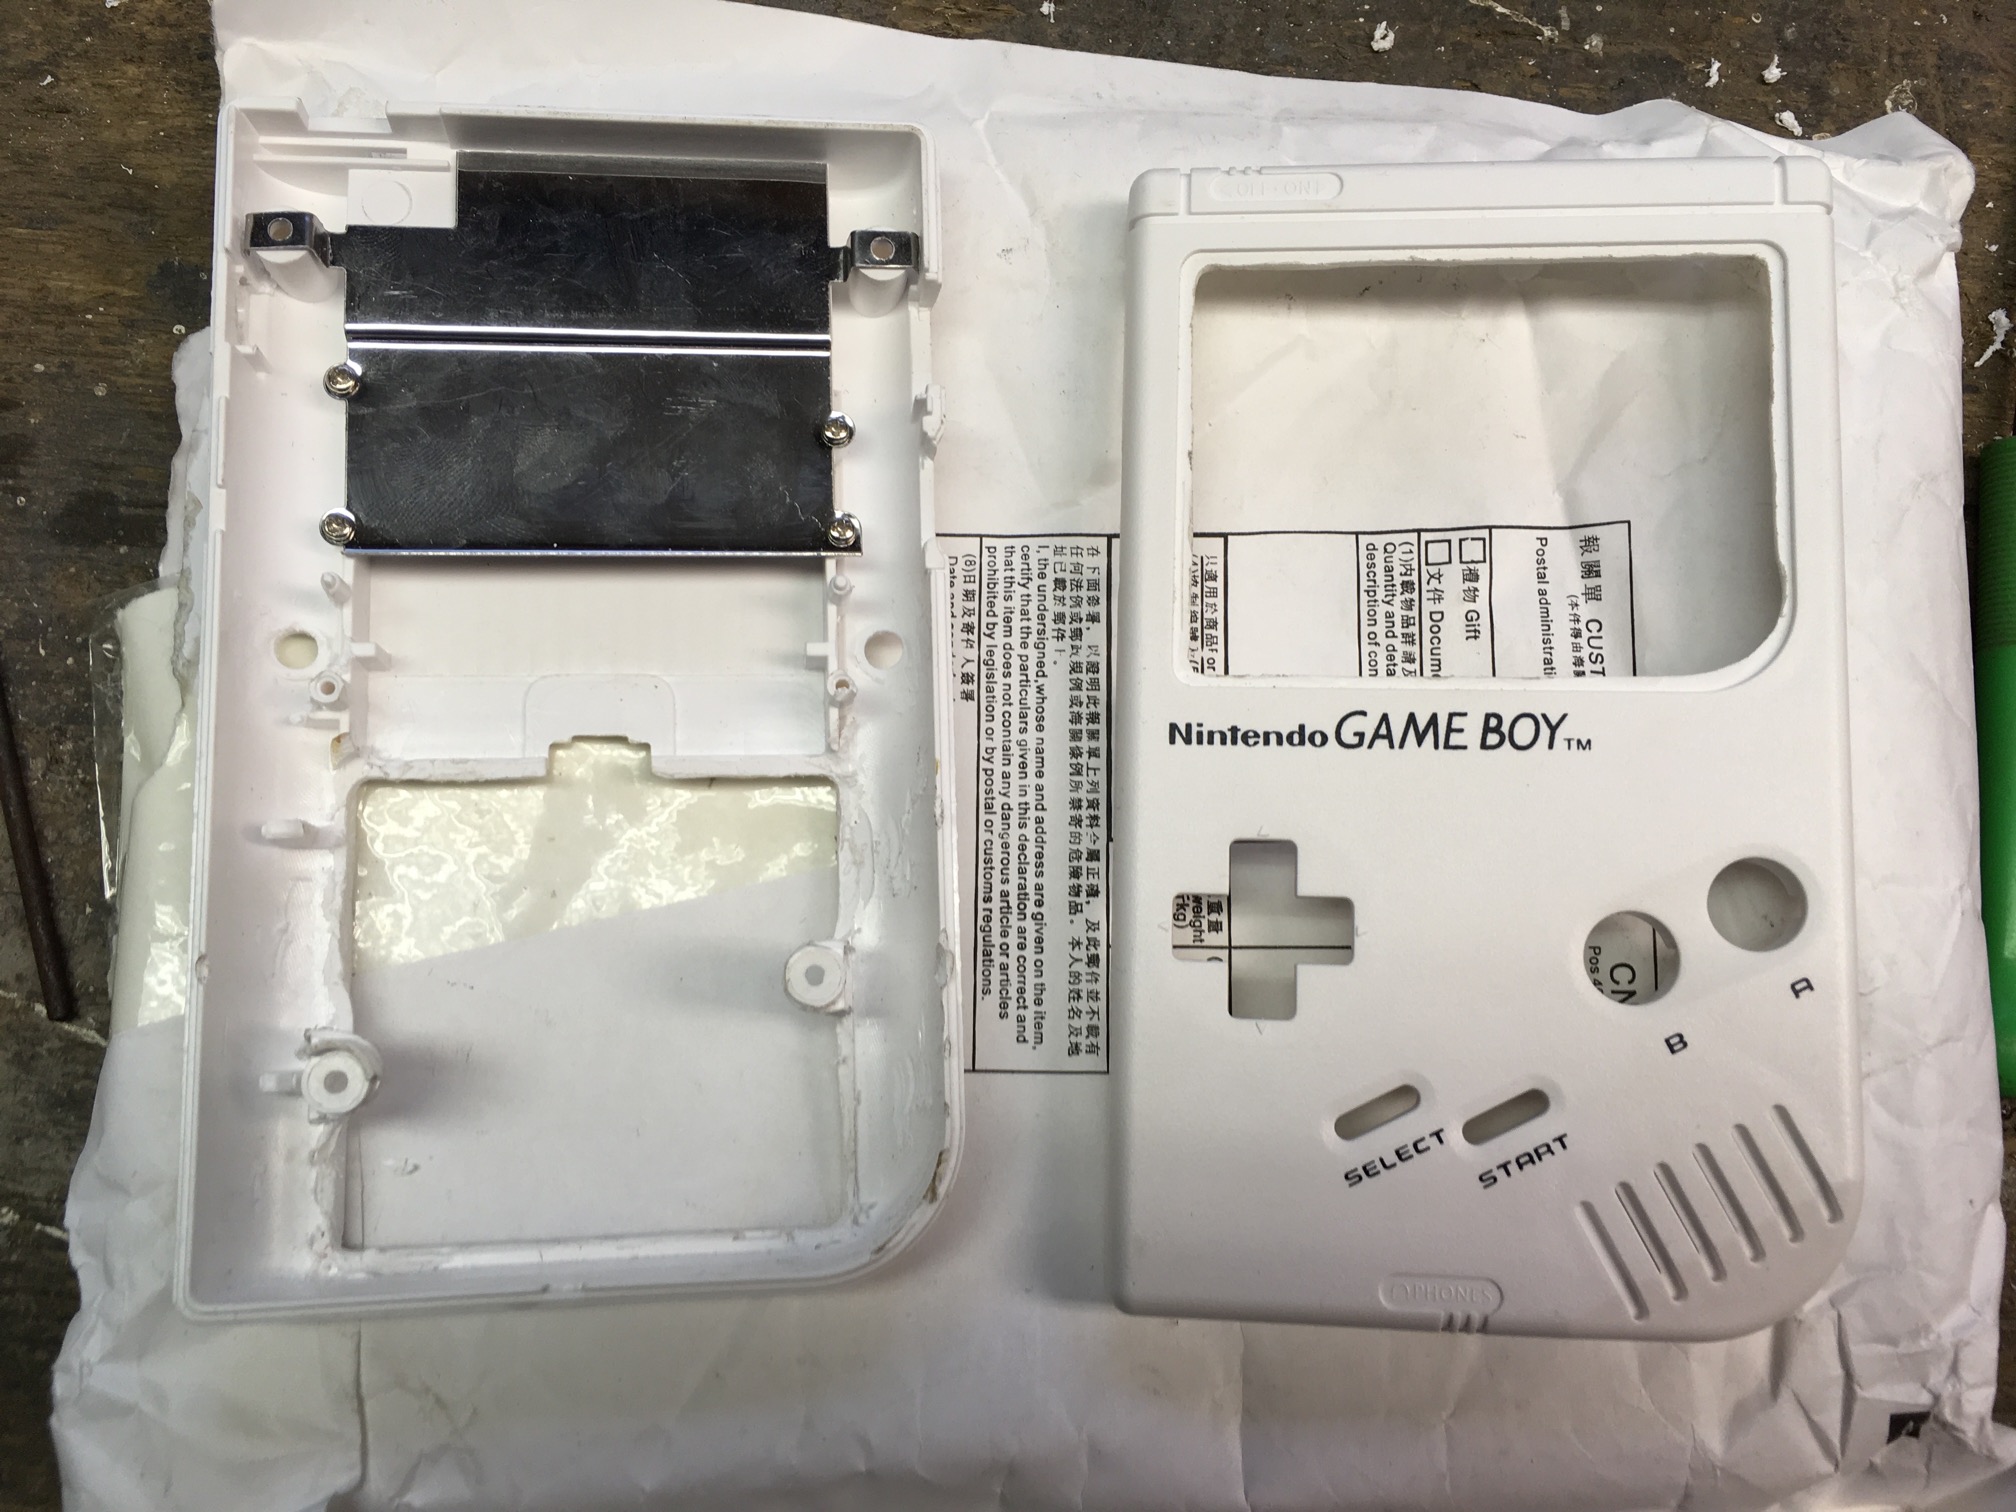 (Caption) Battery compartment removed, screen area extended and the middle screw posts grounded out. So instead of six screws, the whole case has to hold together using only four screws. The newly created space will be used for tactile switches for L and R buttons.